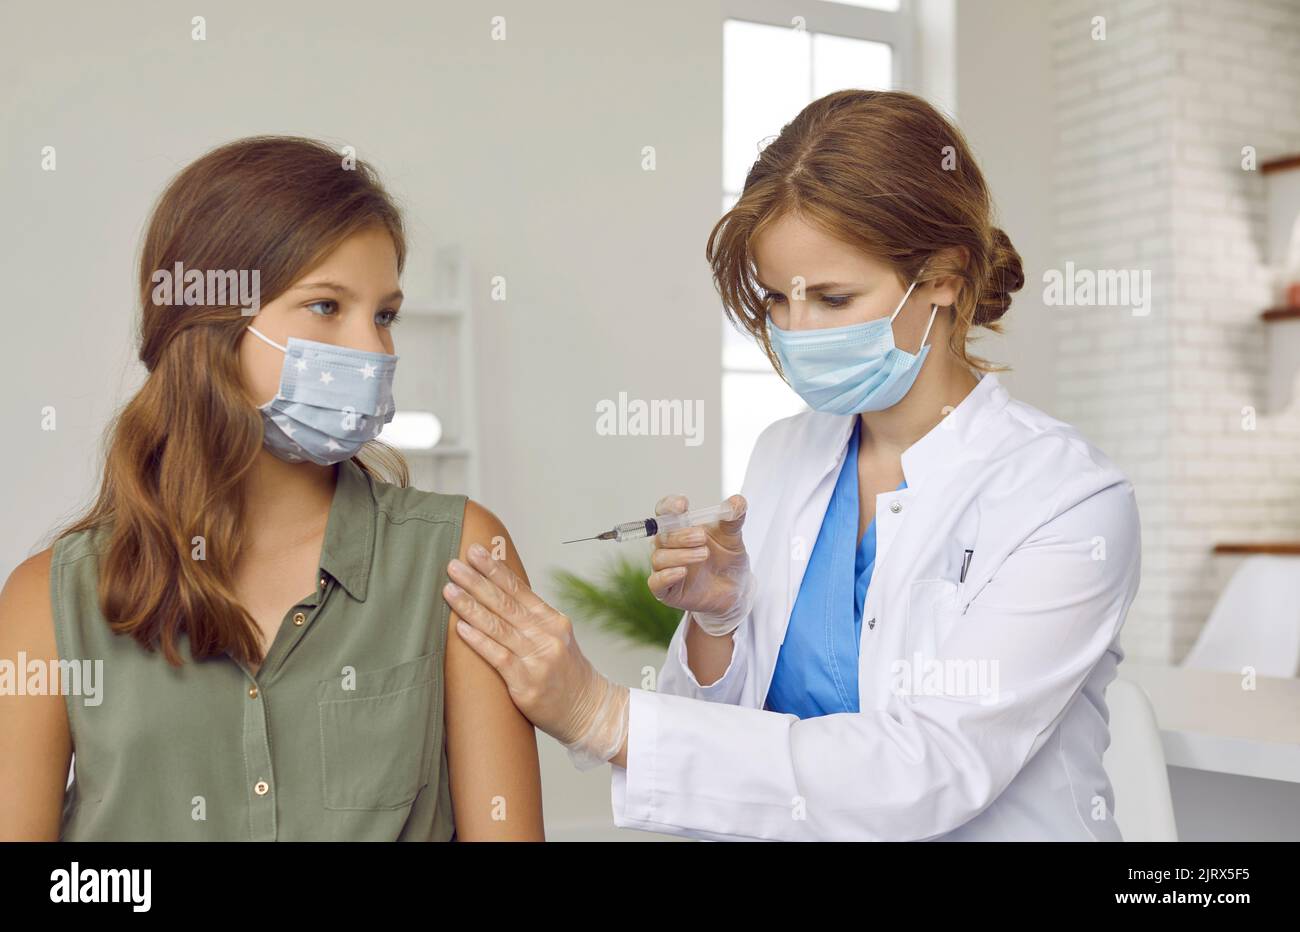 Doctor at vaccination center gives Covid 19 vaccine to teenage girl wearing face mask. Stock Photo